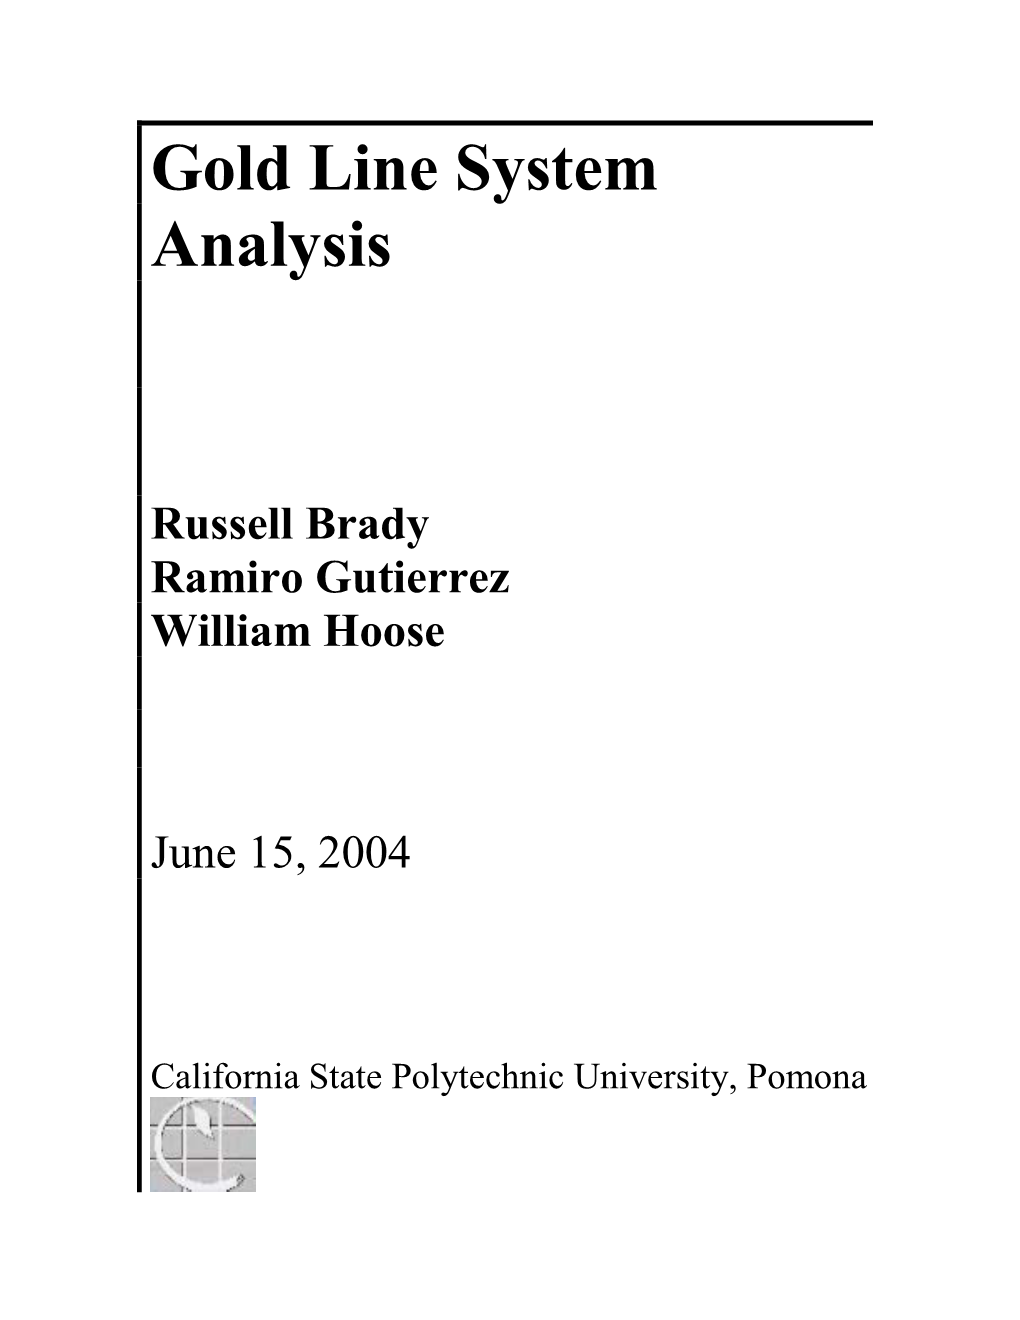 Gold Line System Analysis